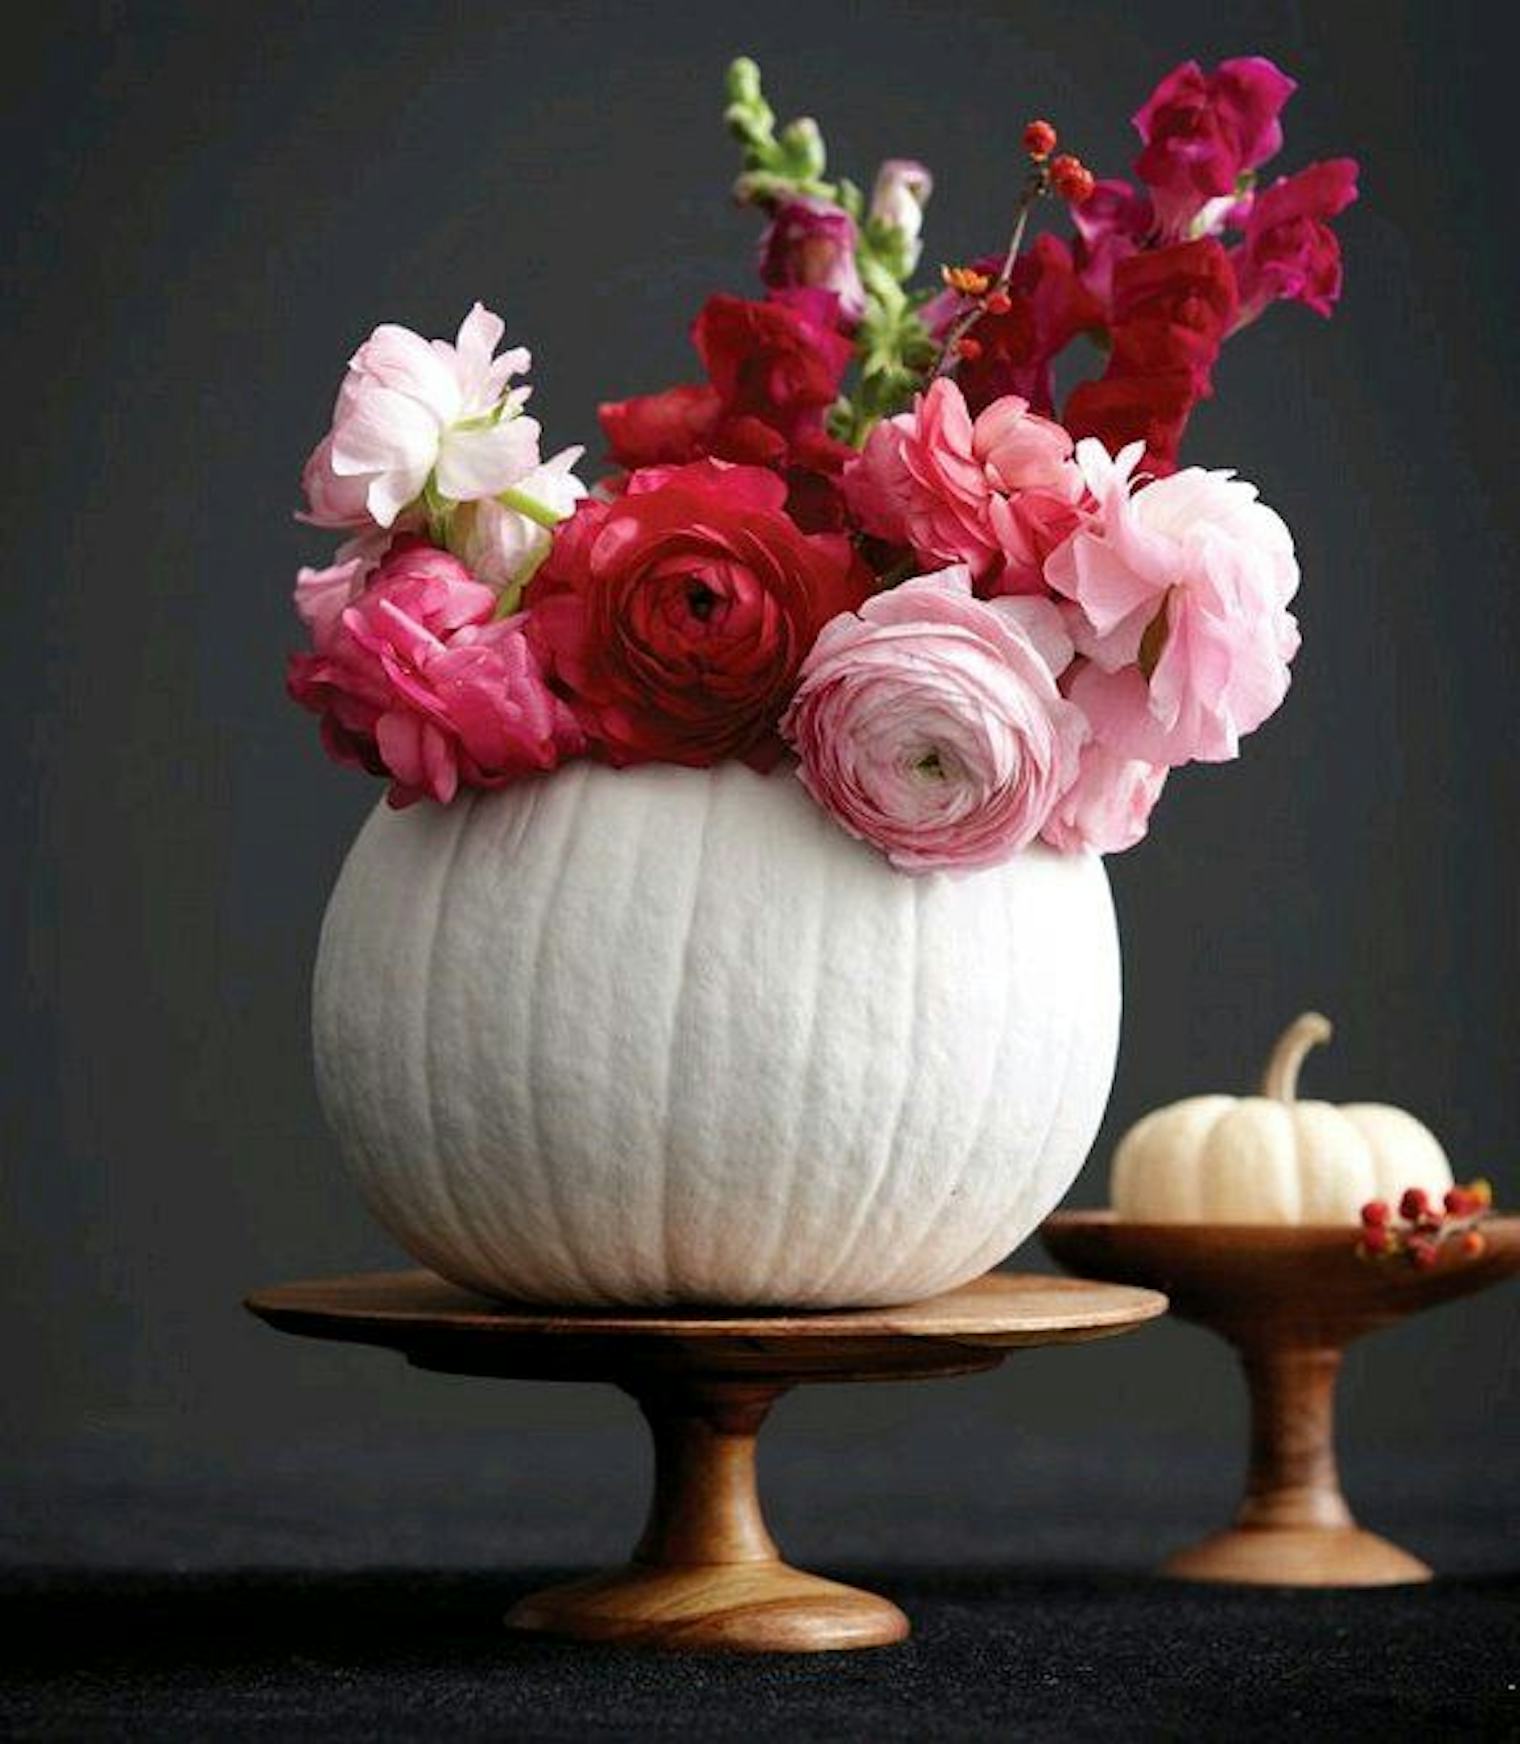 14 Chic Ways To Dress Up Your Pumpkin This Halloween